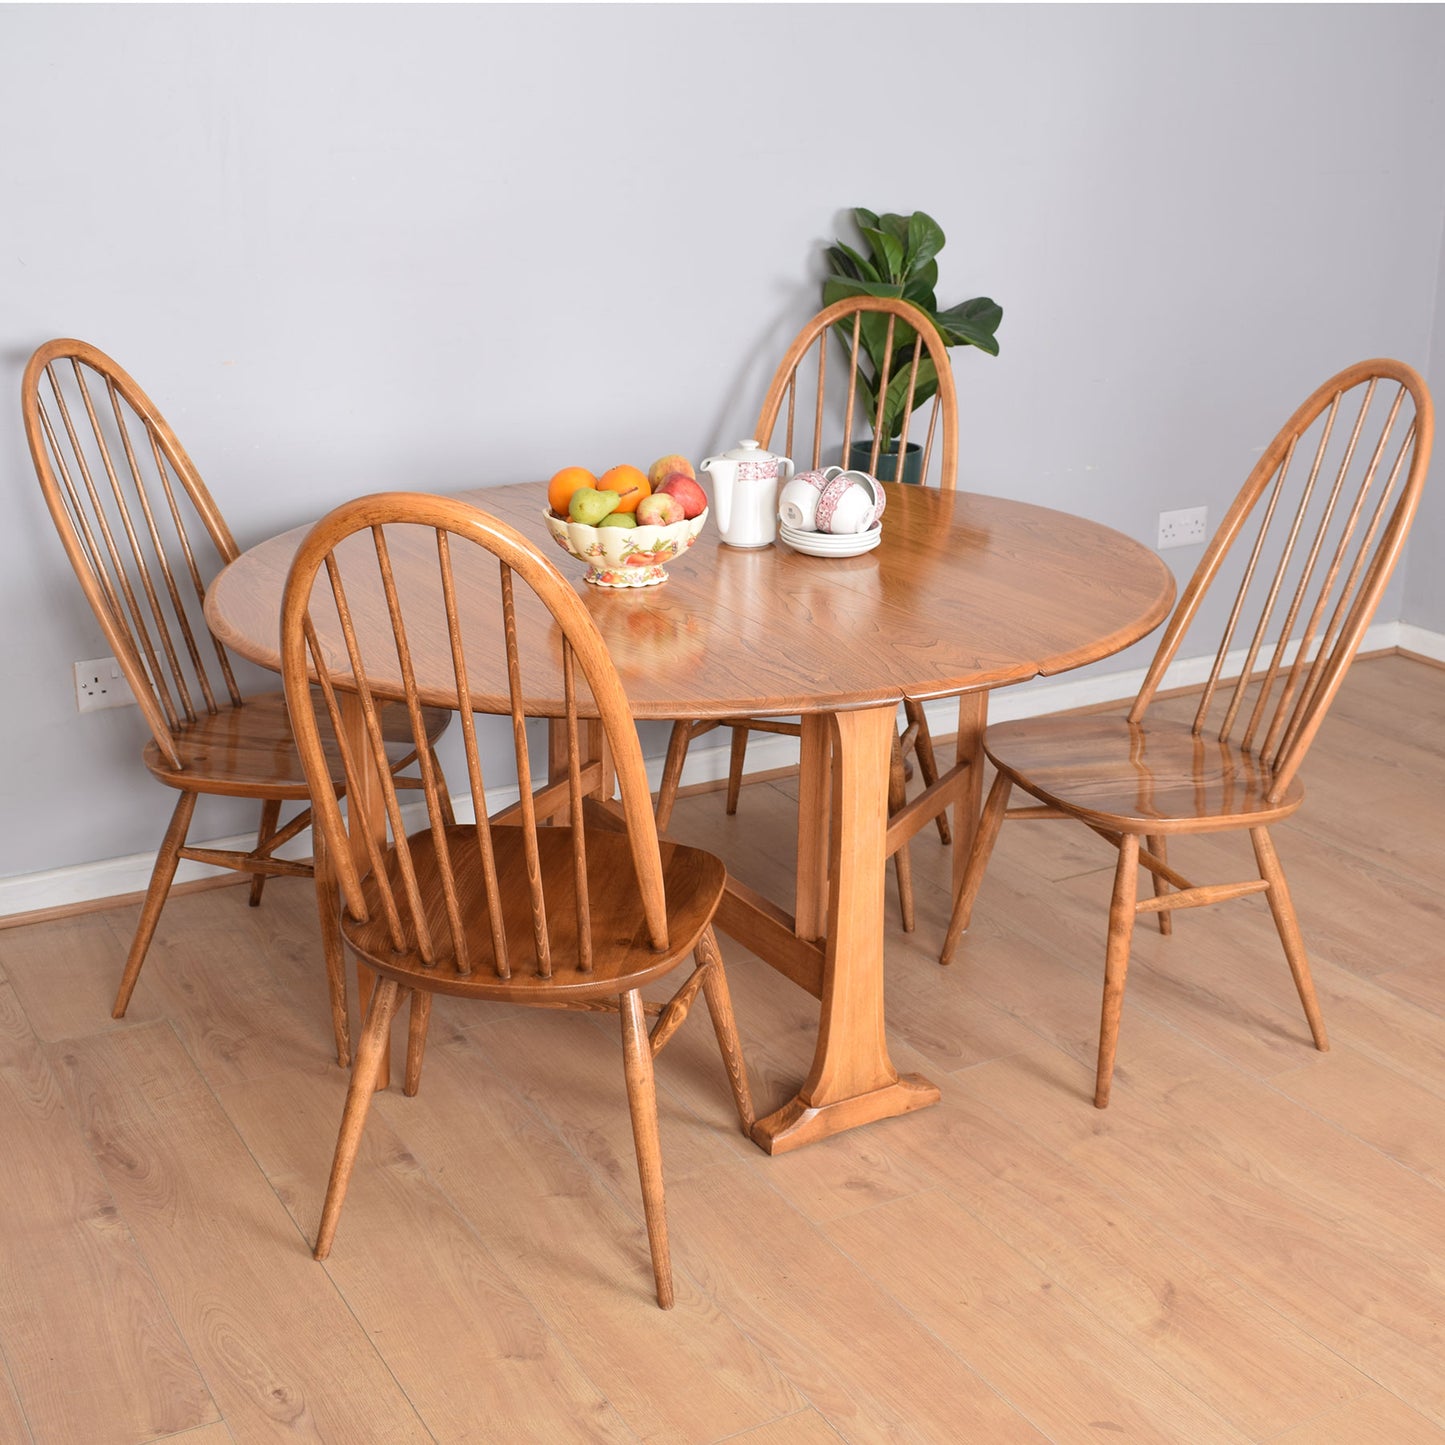 Restored Ercol Dining Table with Four Chairs